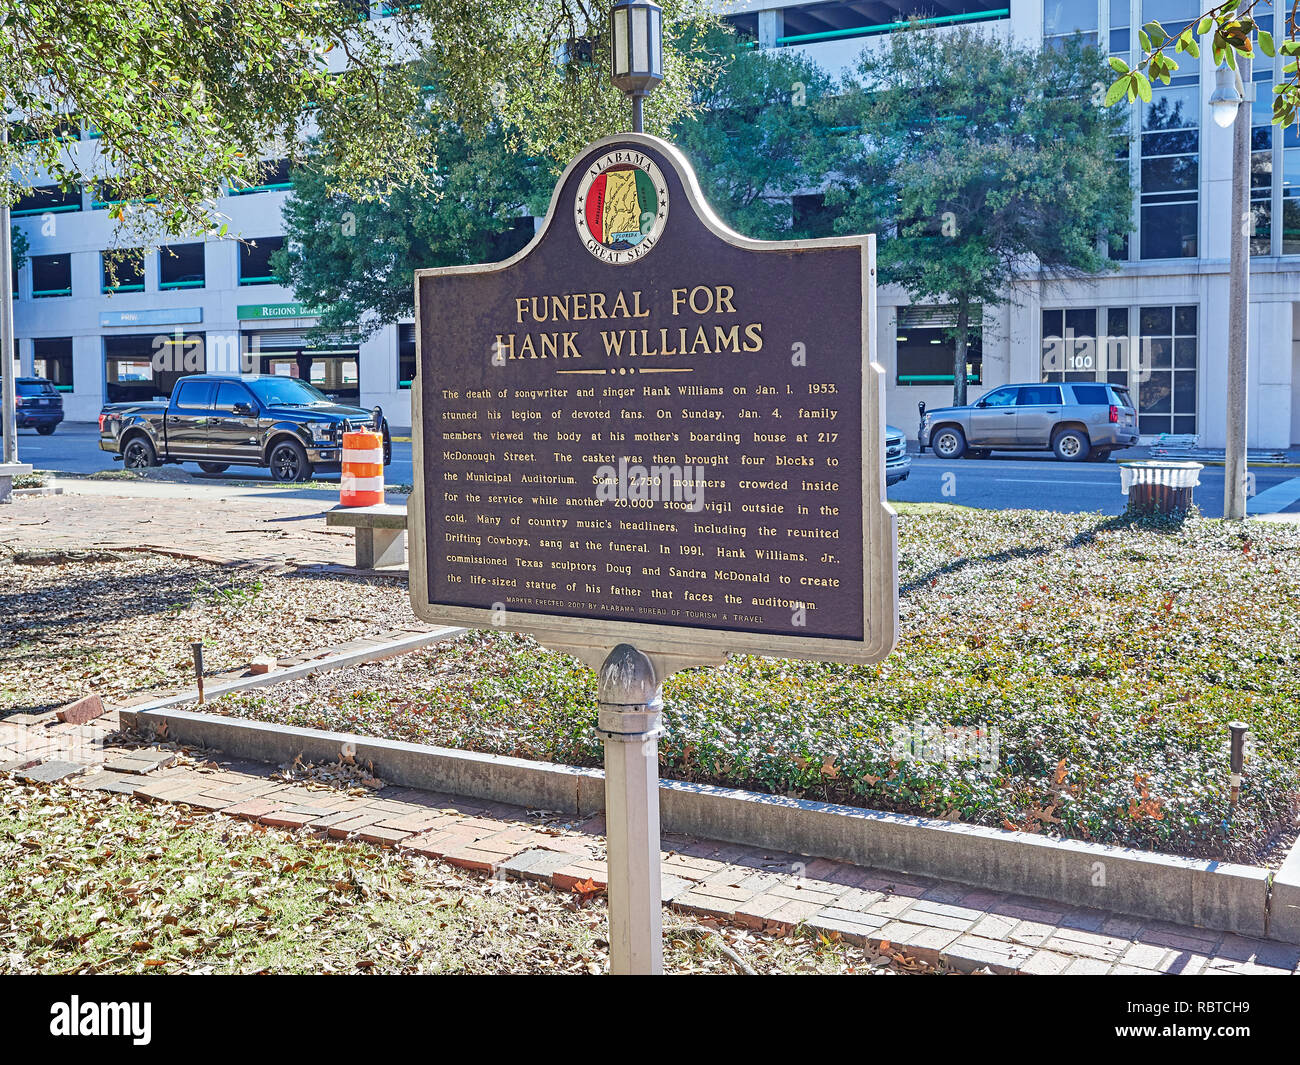 Historical marker or memorial describing Hank Williams funeral in 1953 in the city of Montgomery Alabama, USA. Stock Photo